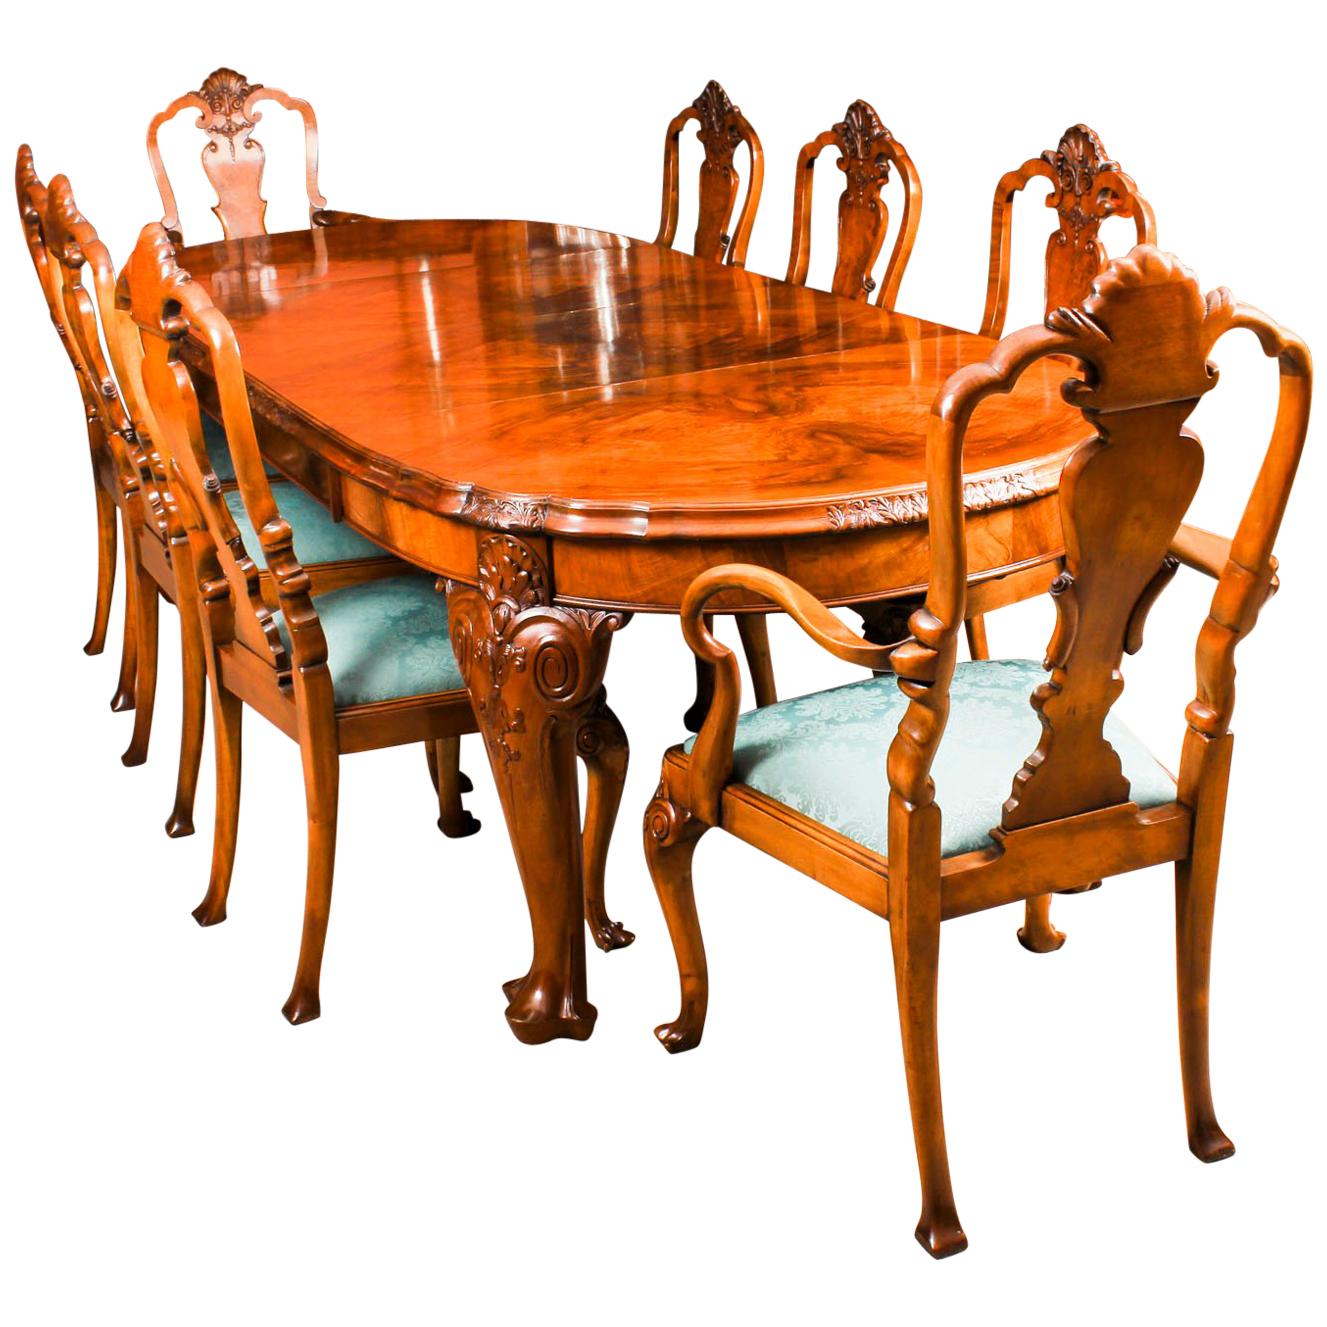 Early 20th Century Edwardian Queen Anne Revival Dining Table and 8 Chairs